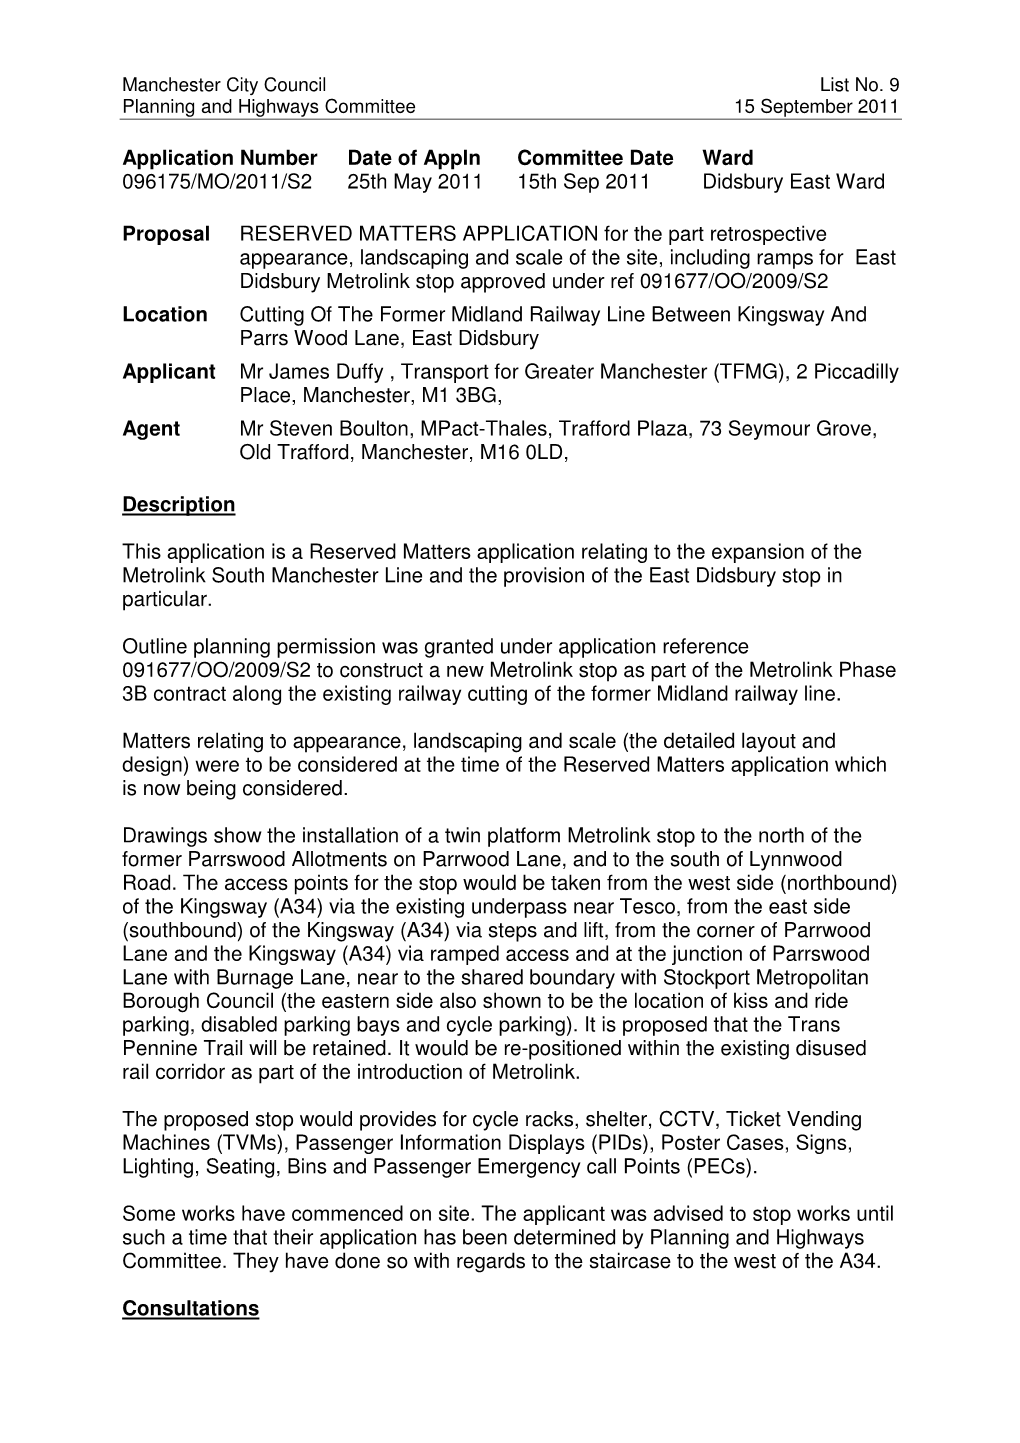 List No. 9 Planning and Highways Committee 15 September 2011